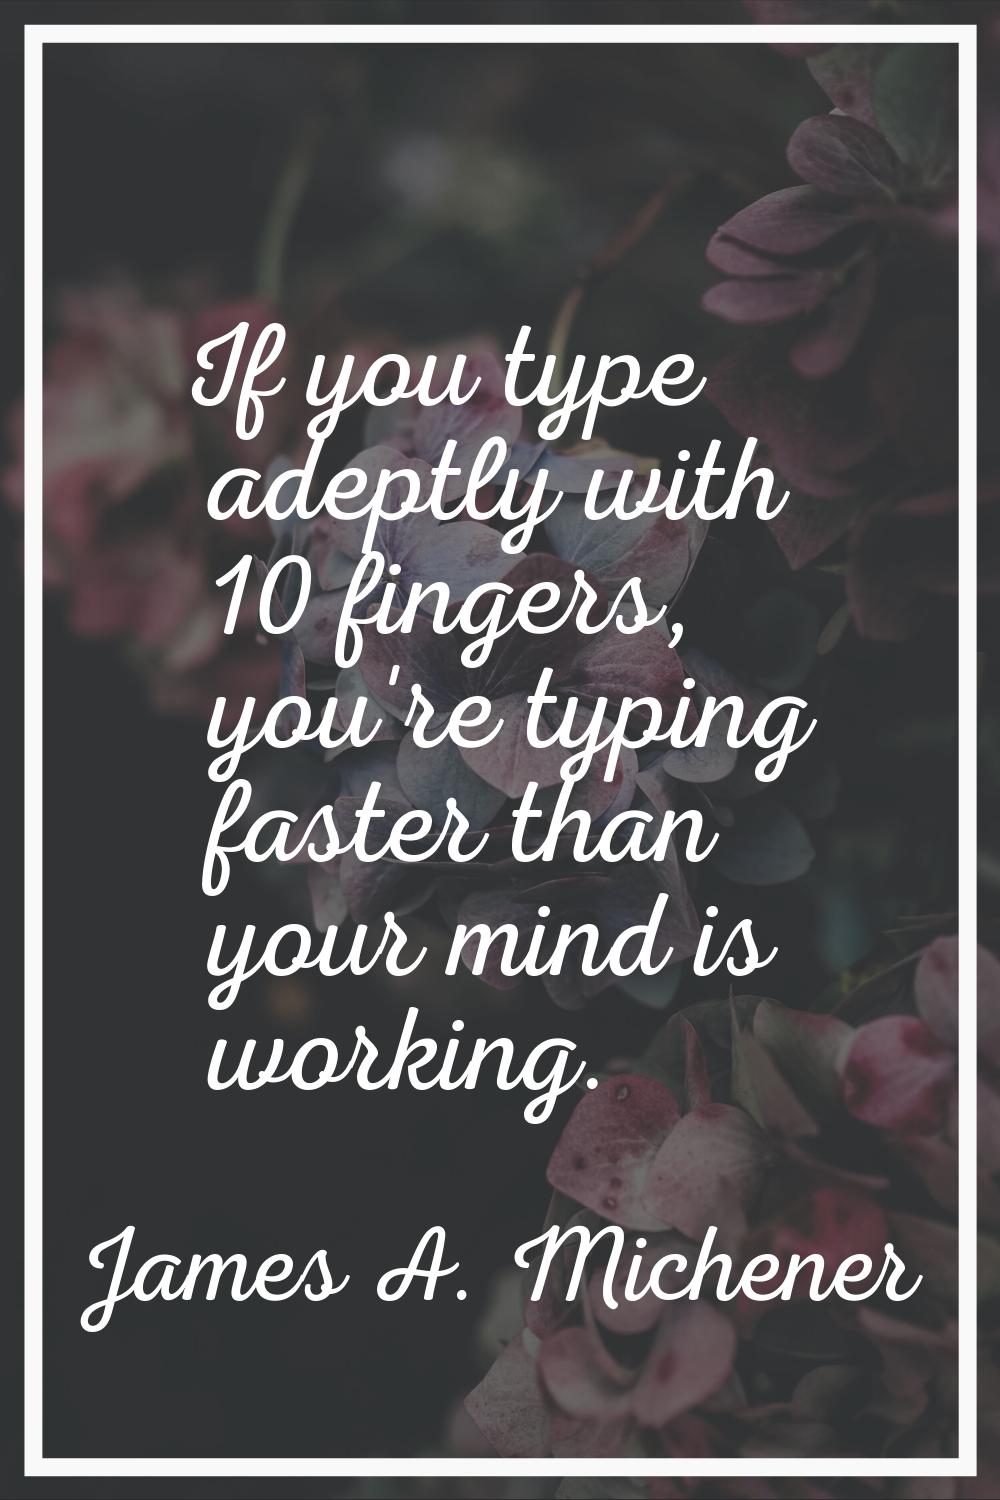 If you type adeptly with 10 fingers, you're typing faster than your mind is working.